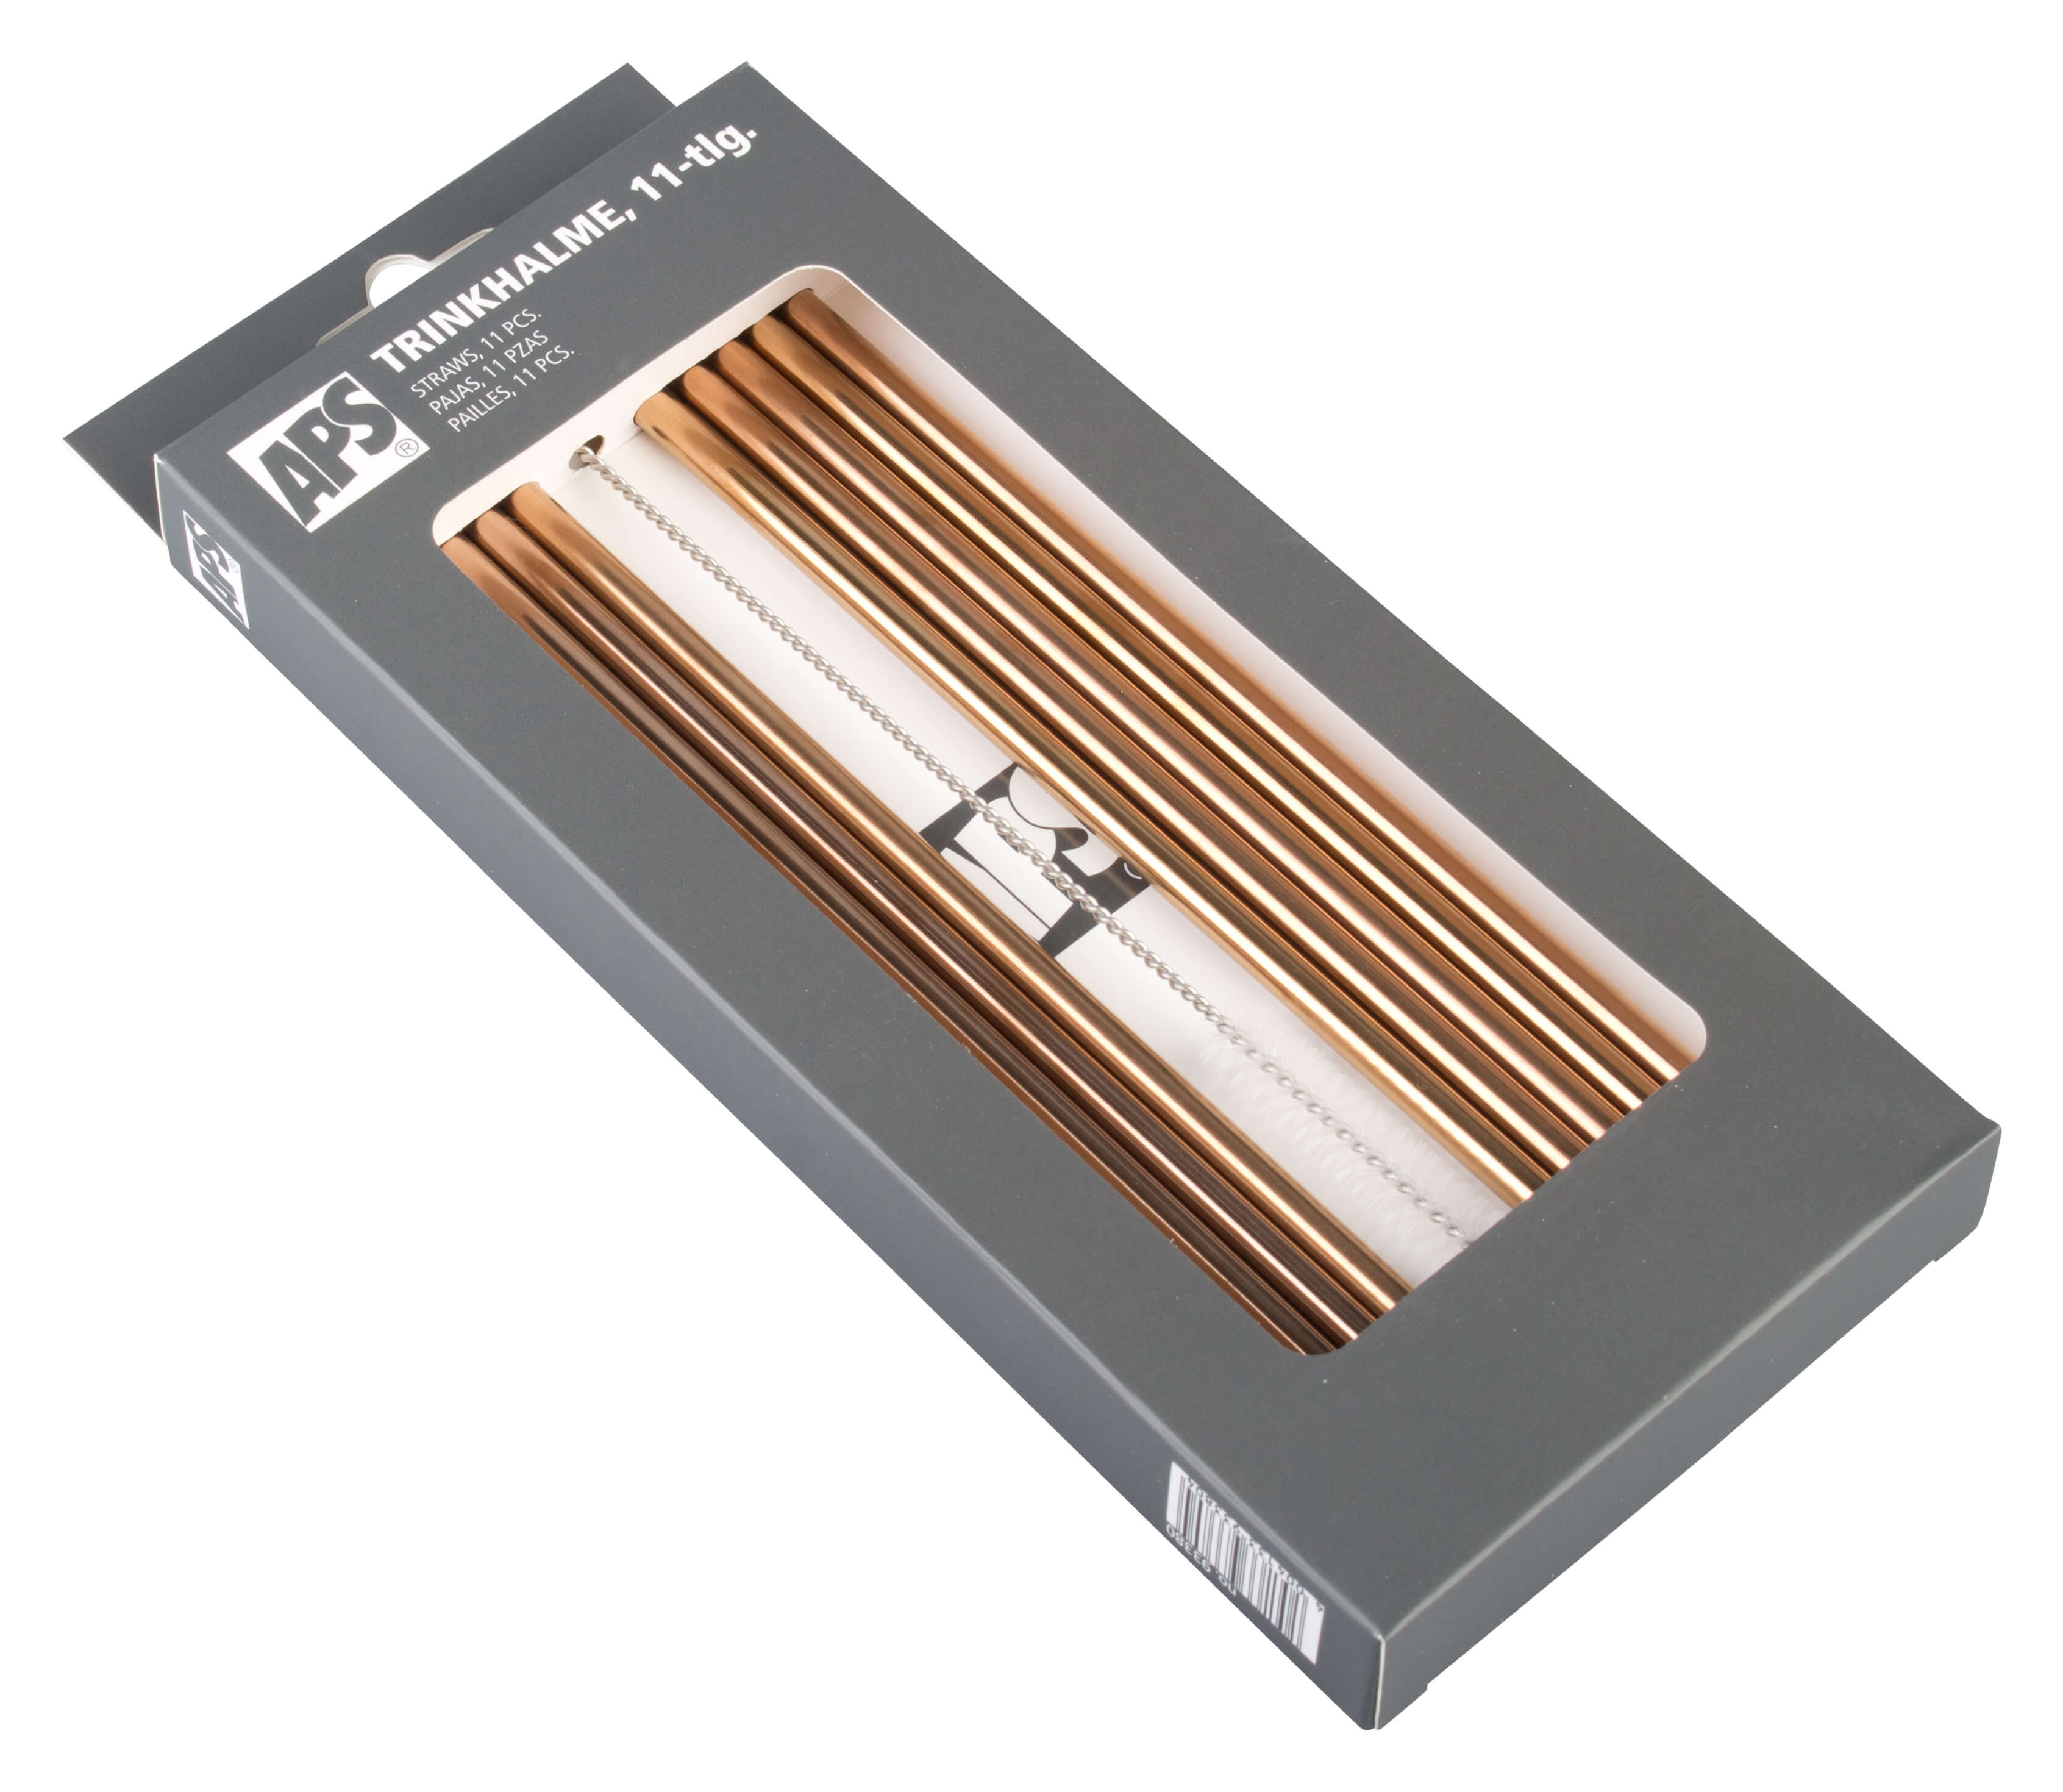 Drinking straws, stainless steel (6x215mm), copper-colored - 10 pcs. plus cleaning brush